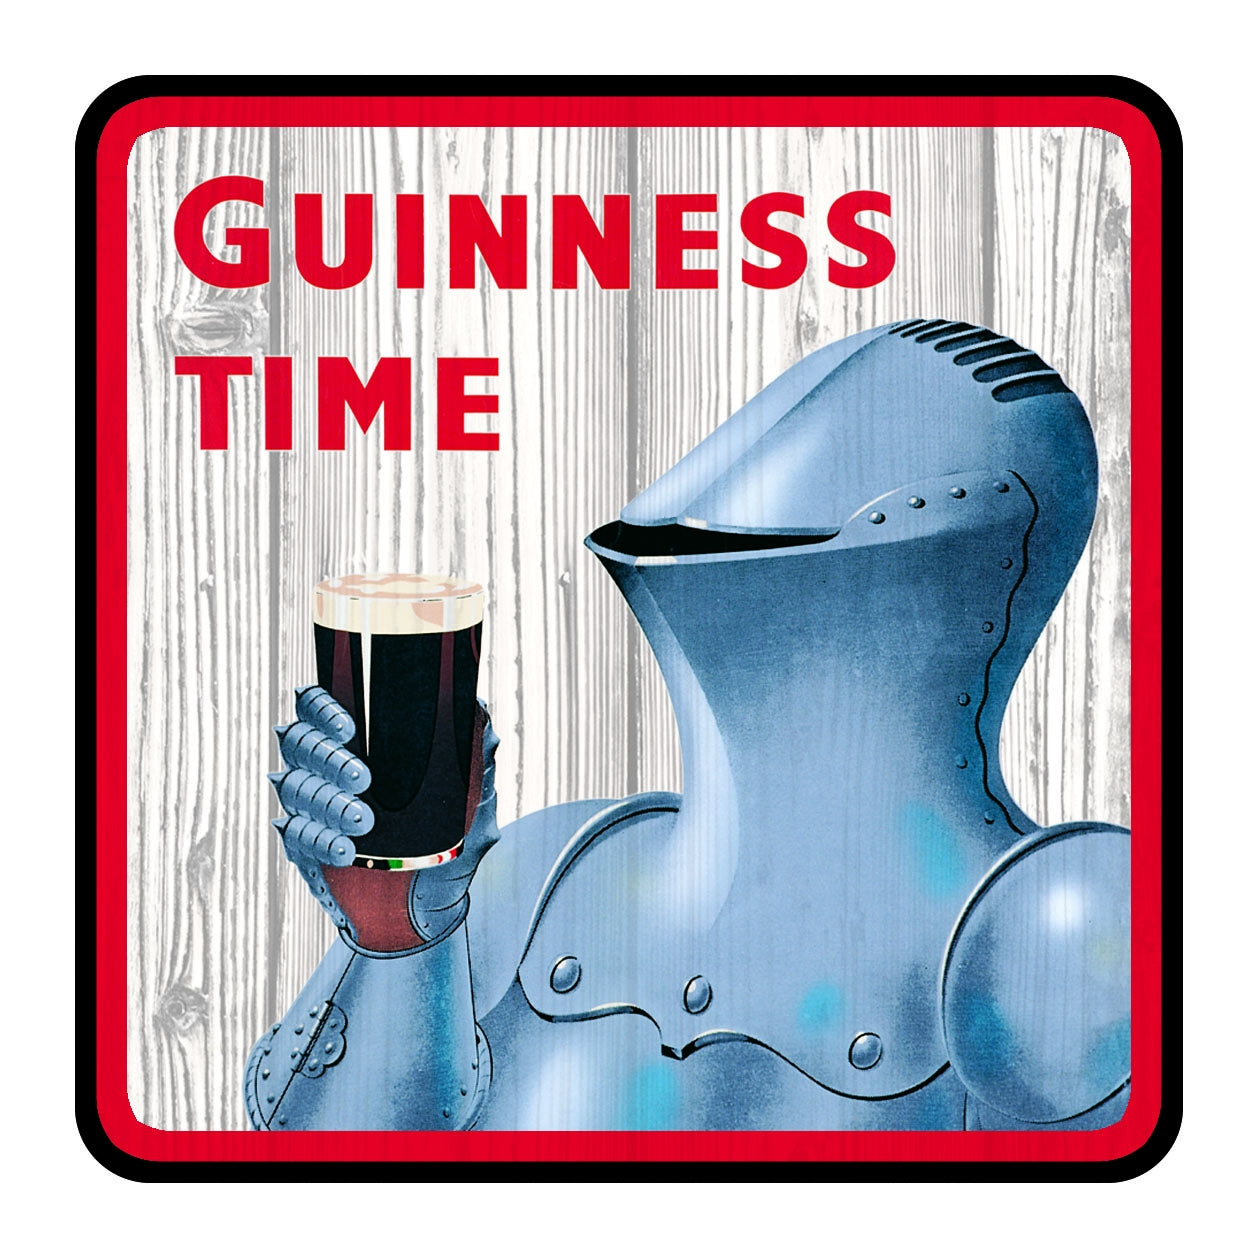 Get ready for a fun-filled evening of Guinness Epic Coaster Games and pub games! Gather your friends and join us for Guinness Time, where you can enjoy the iconic Irish stout while engaging in thrilling coaster games.